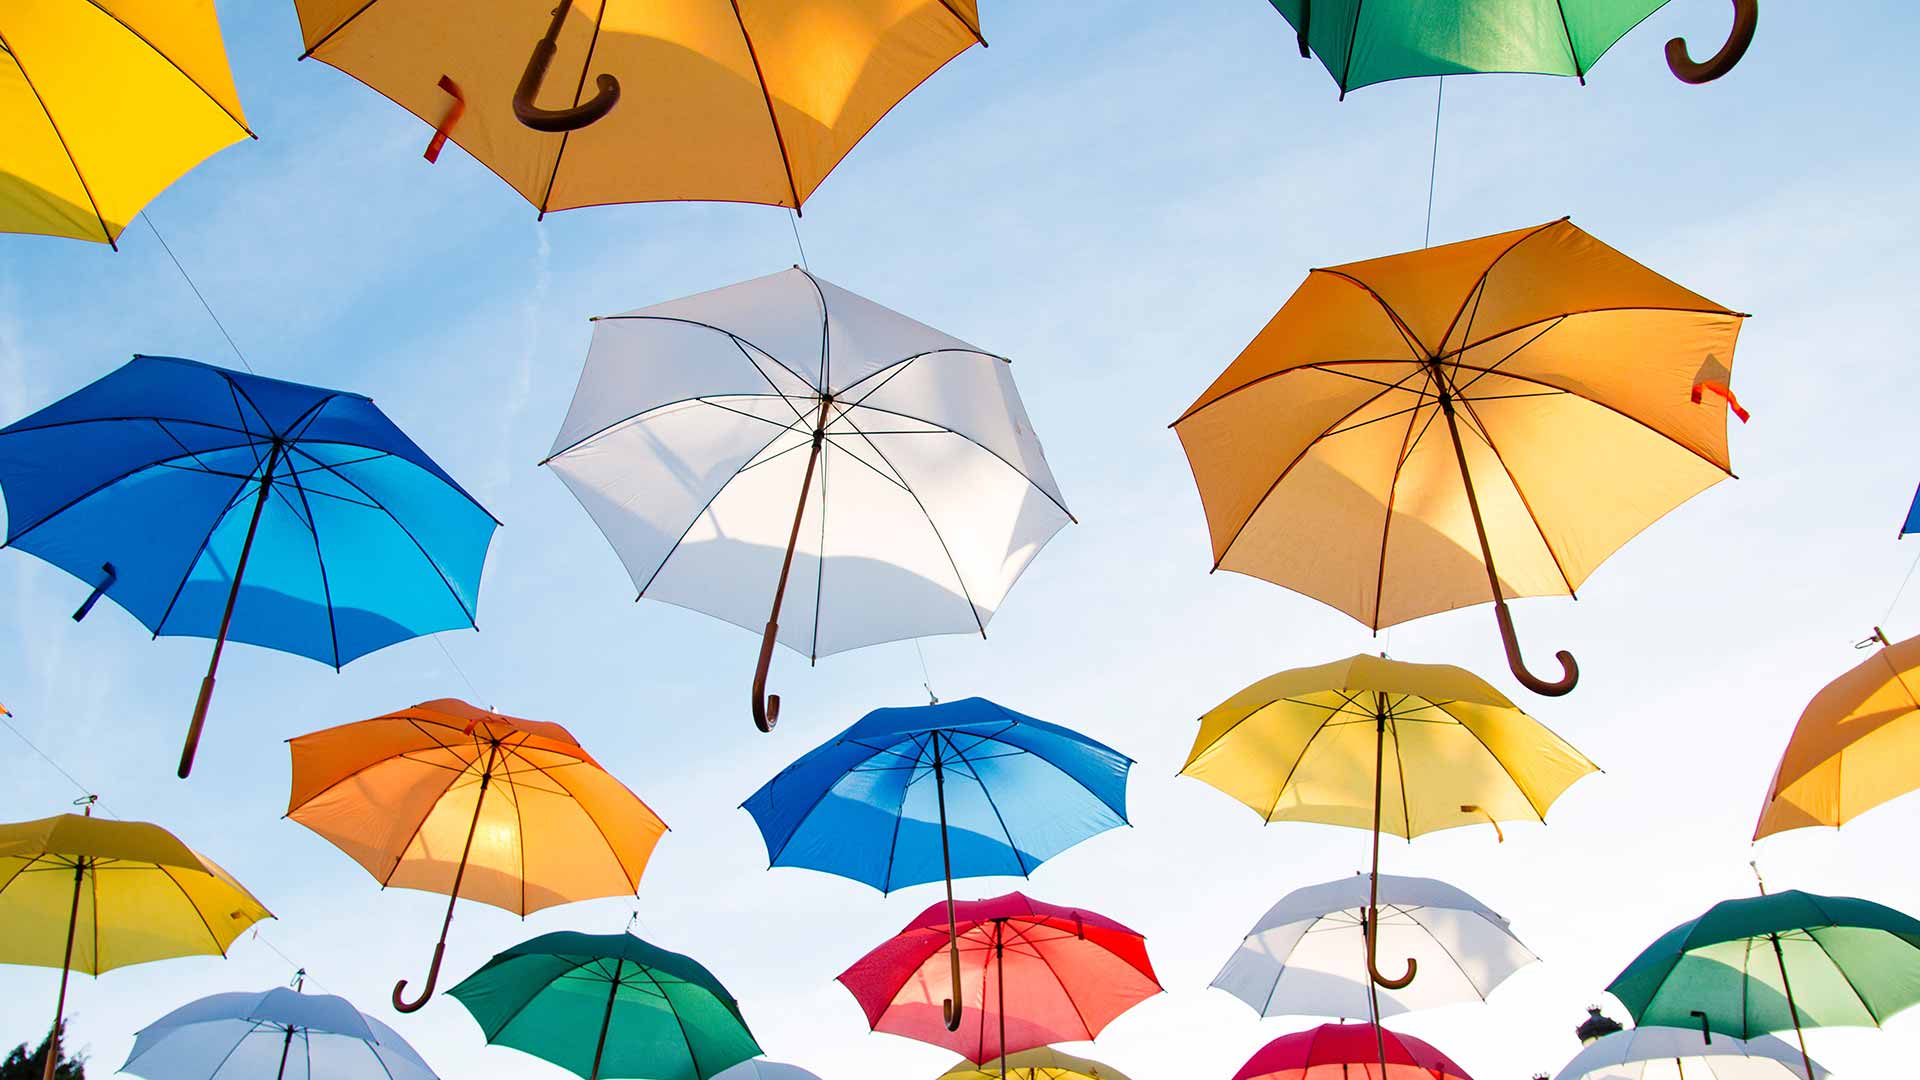 NDIS Provider Insurance: A collection of coloured umbrellas float up into the sky.